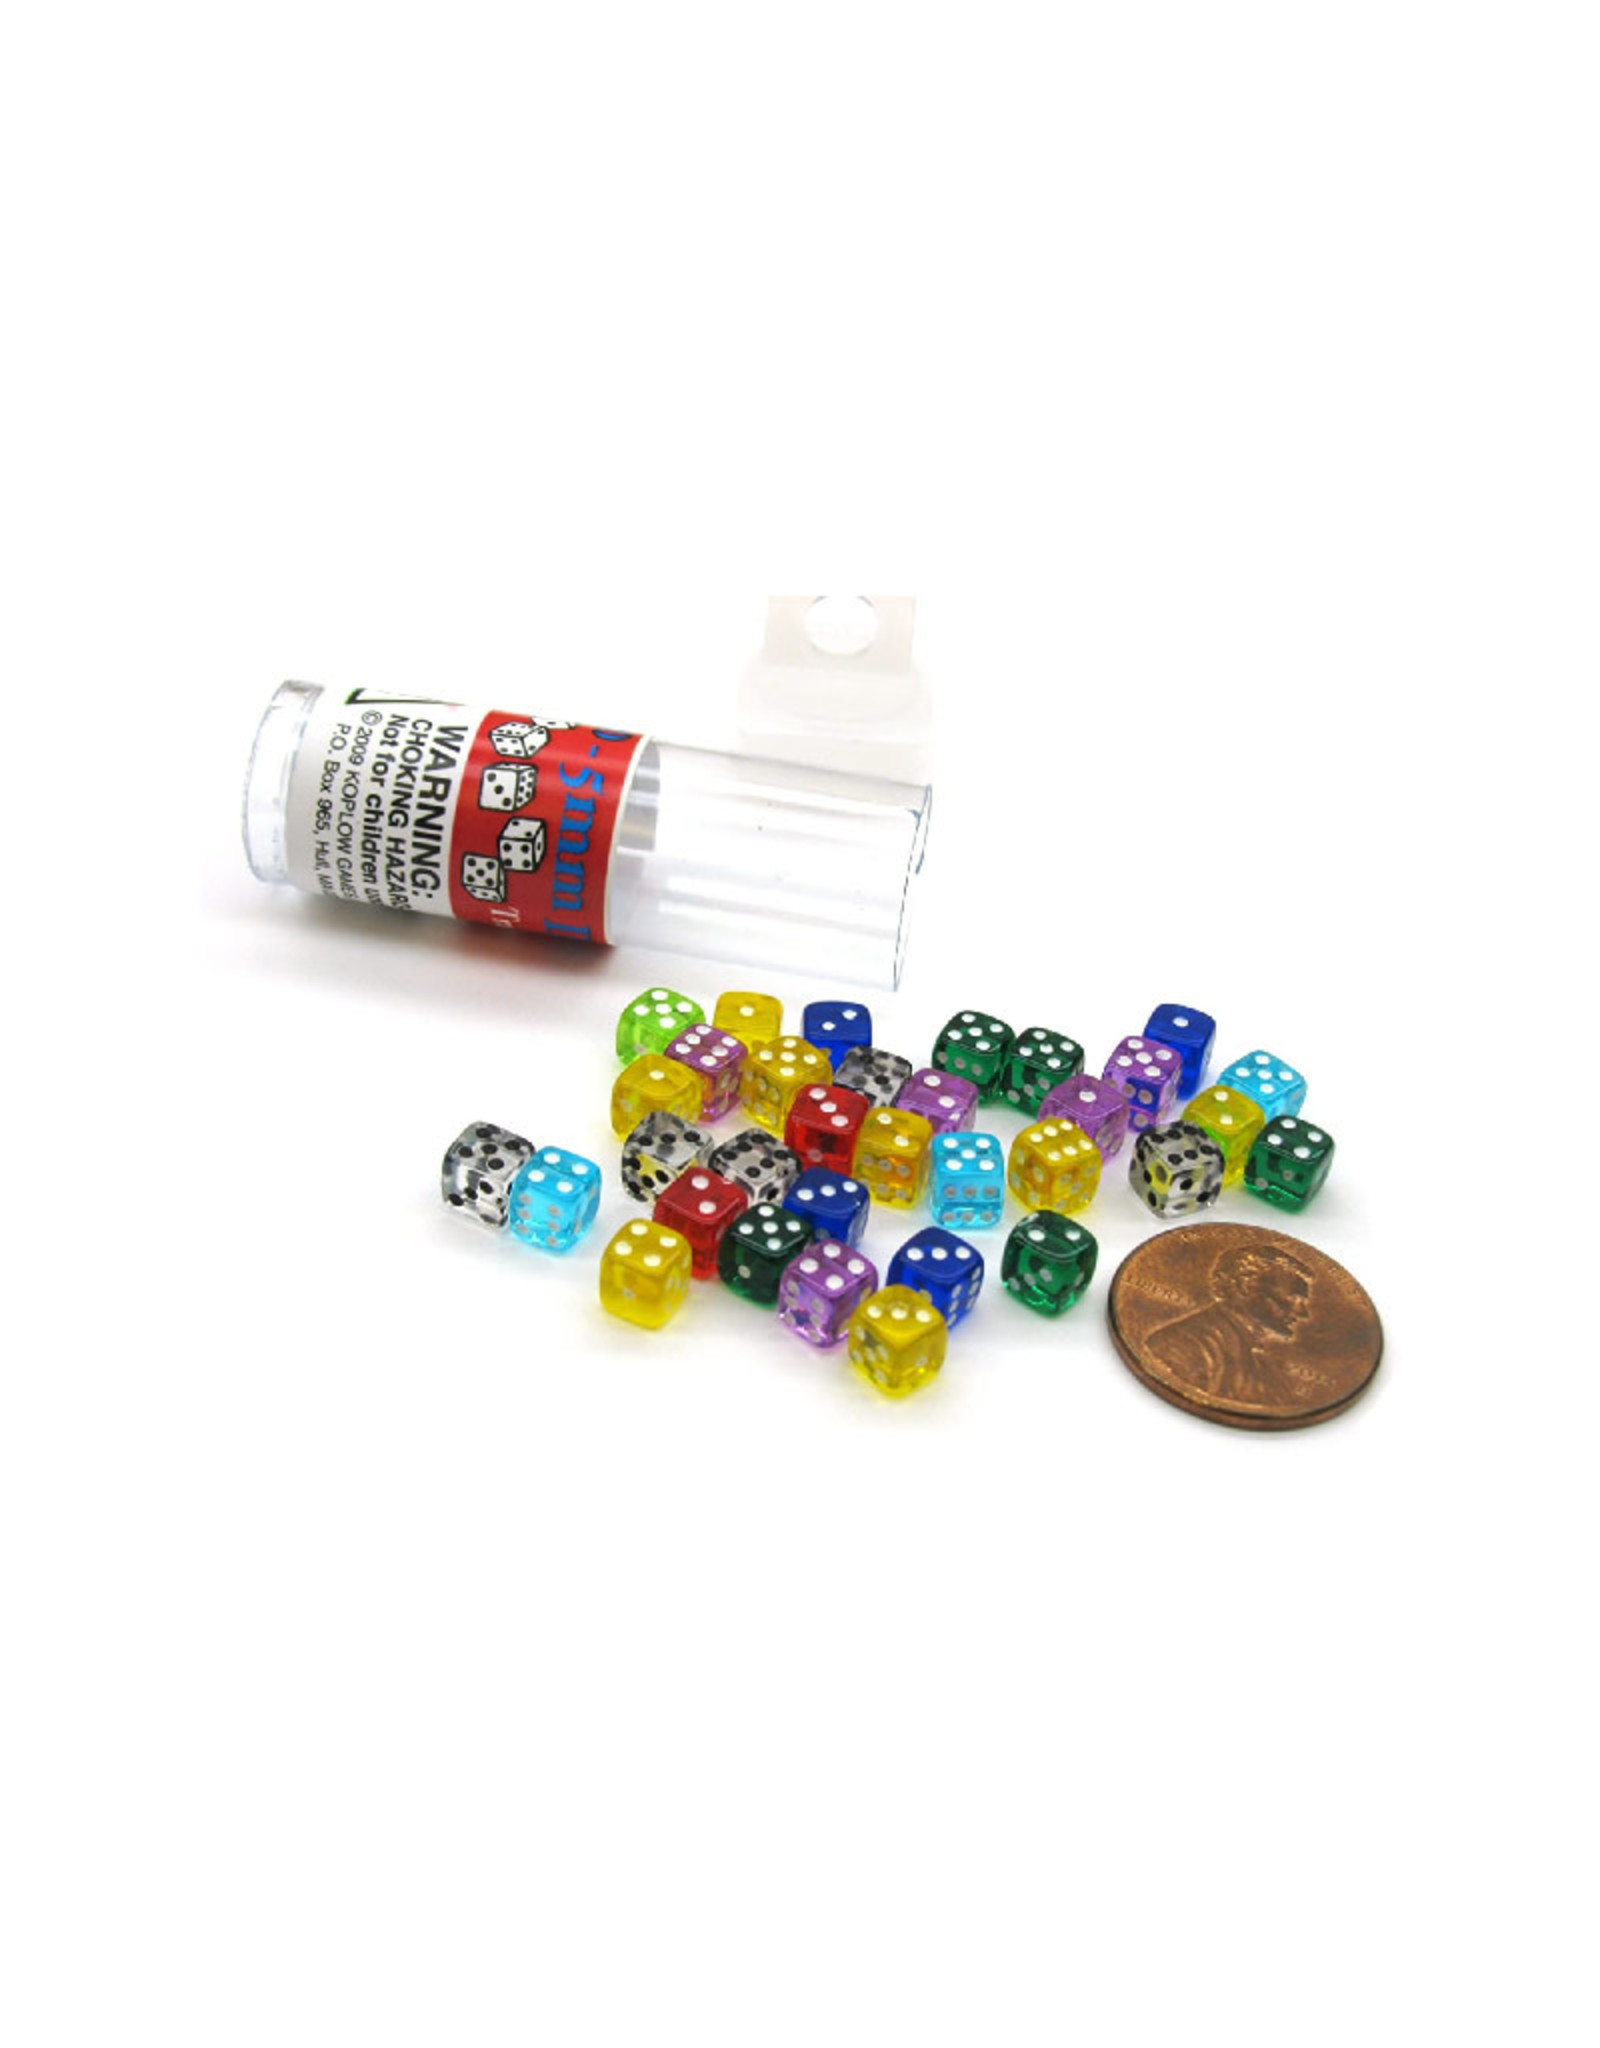 40x Standard 5mm dice set D6 acrylic for Playing Game small dice#% 